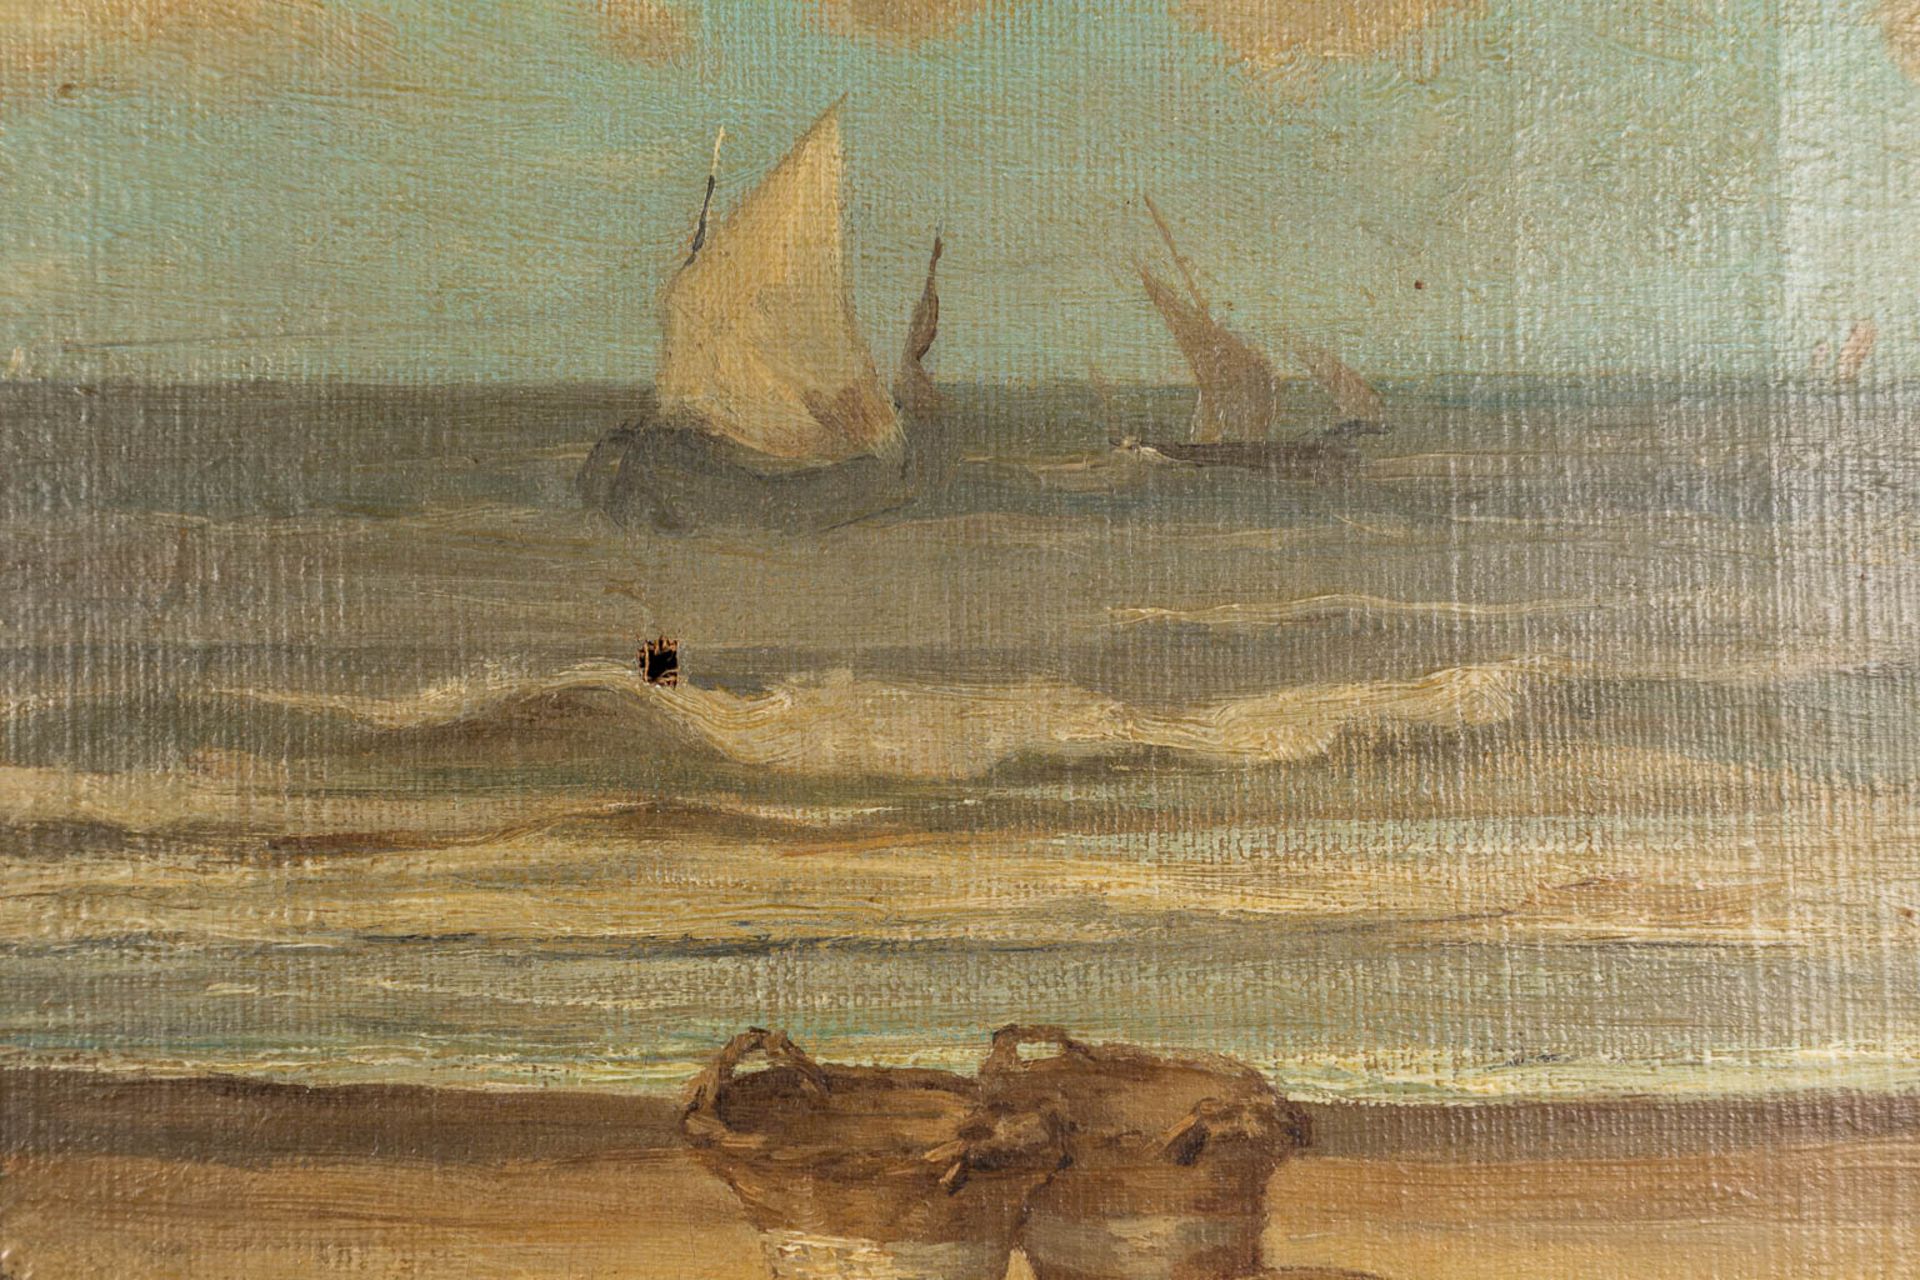 Félix COGEN (1838-1907) 'Fisherman's wife on the beach' oil on canvas. (W:80 x H:45 cm) - Image 6 of 9